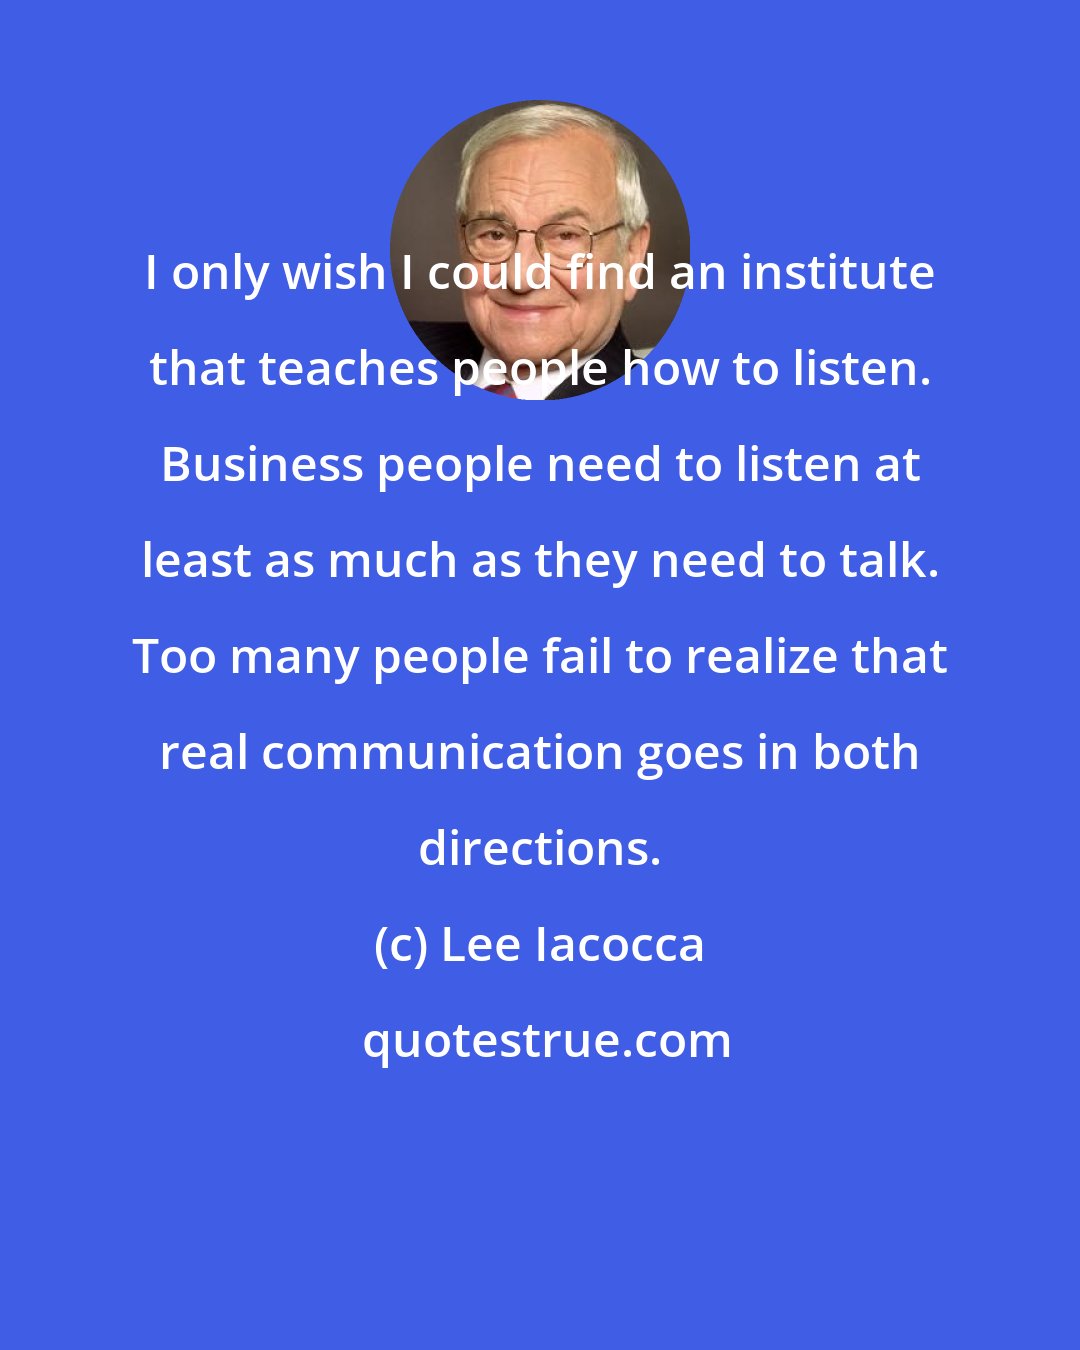 Lee Iacocca: I only wish I could find an institute that teaches people how to listen. Business people need to listen at least as much as they need to talk. Too many people fail to realize that real communication goes in both directions.